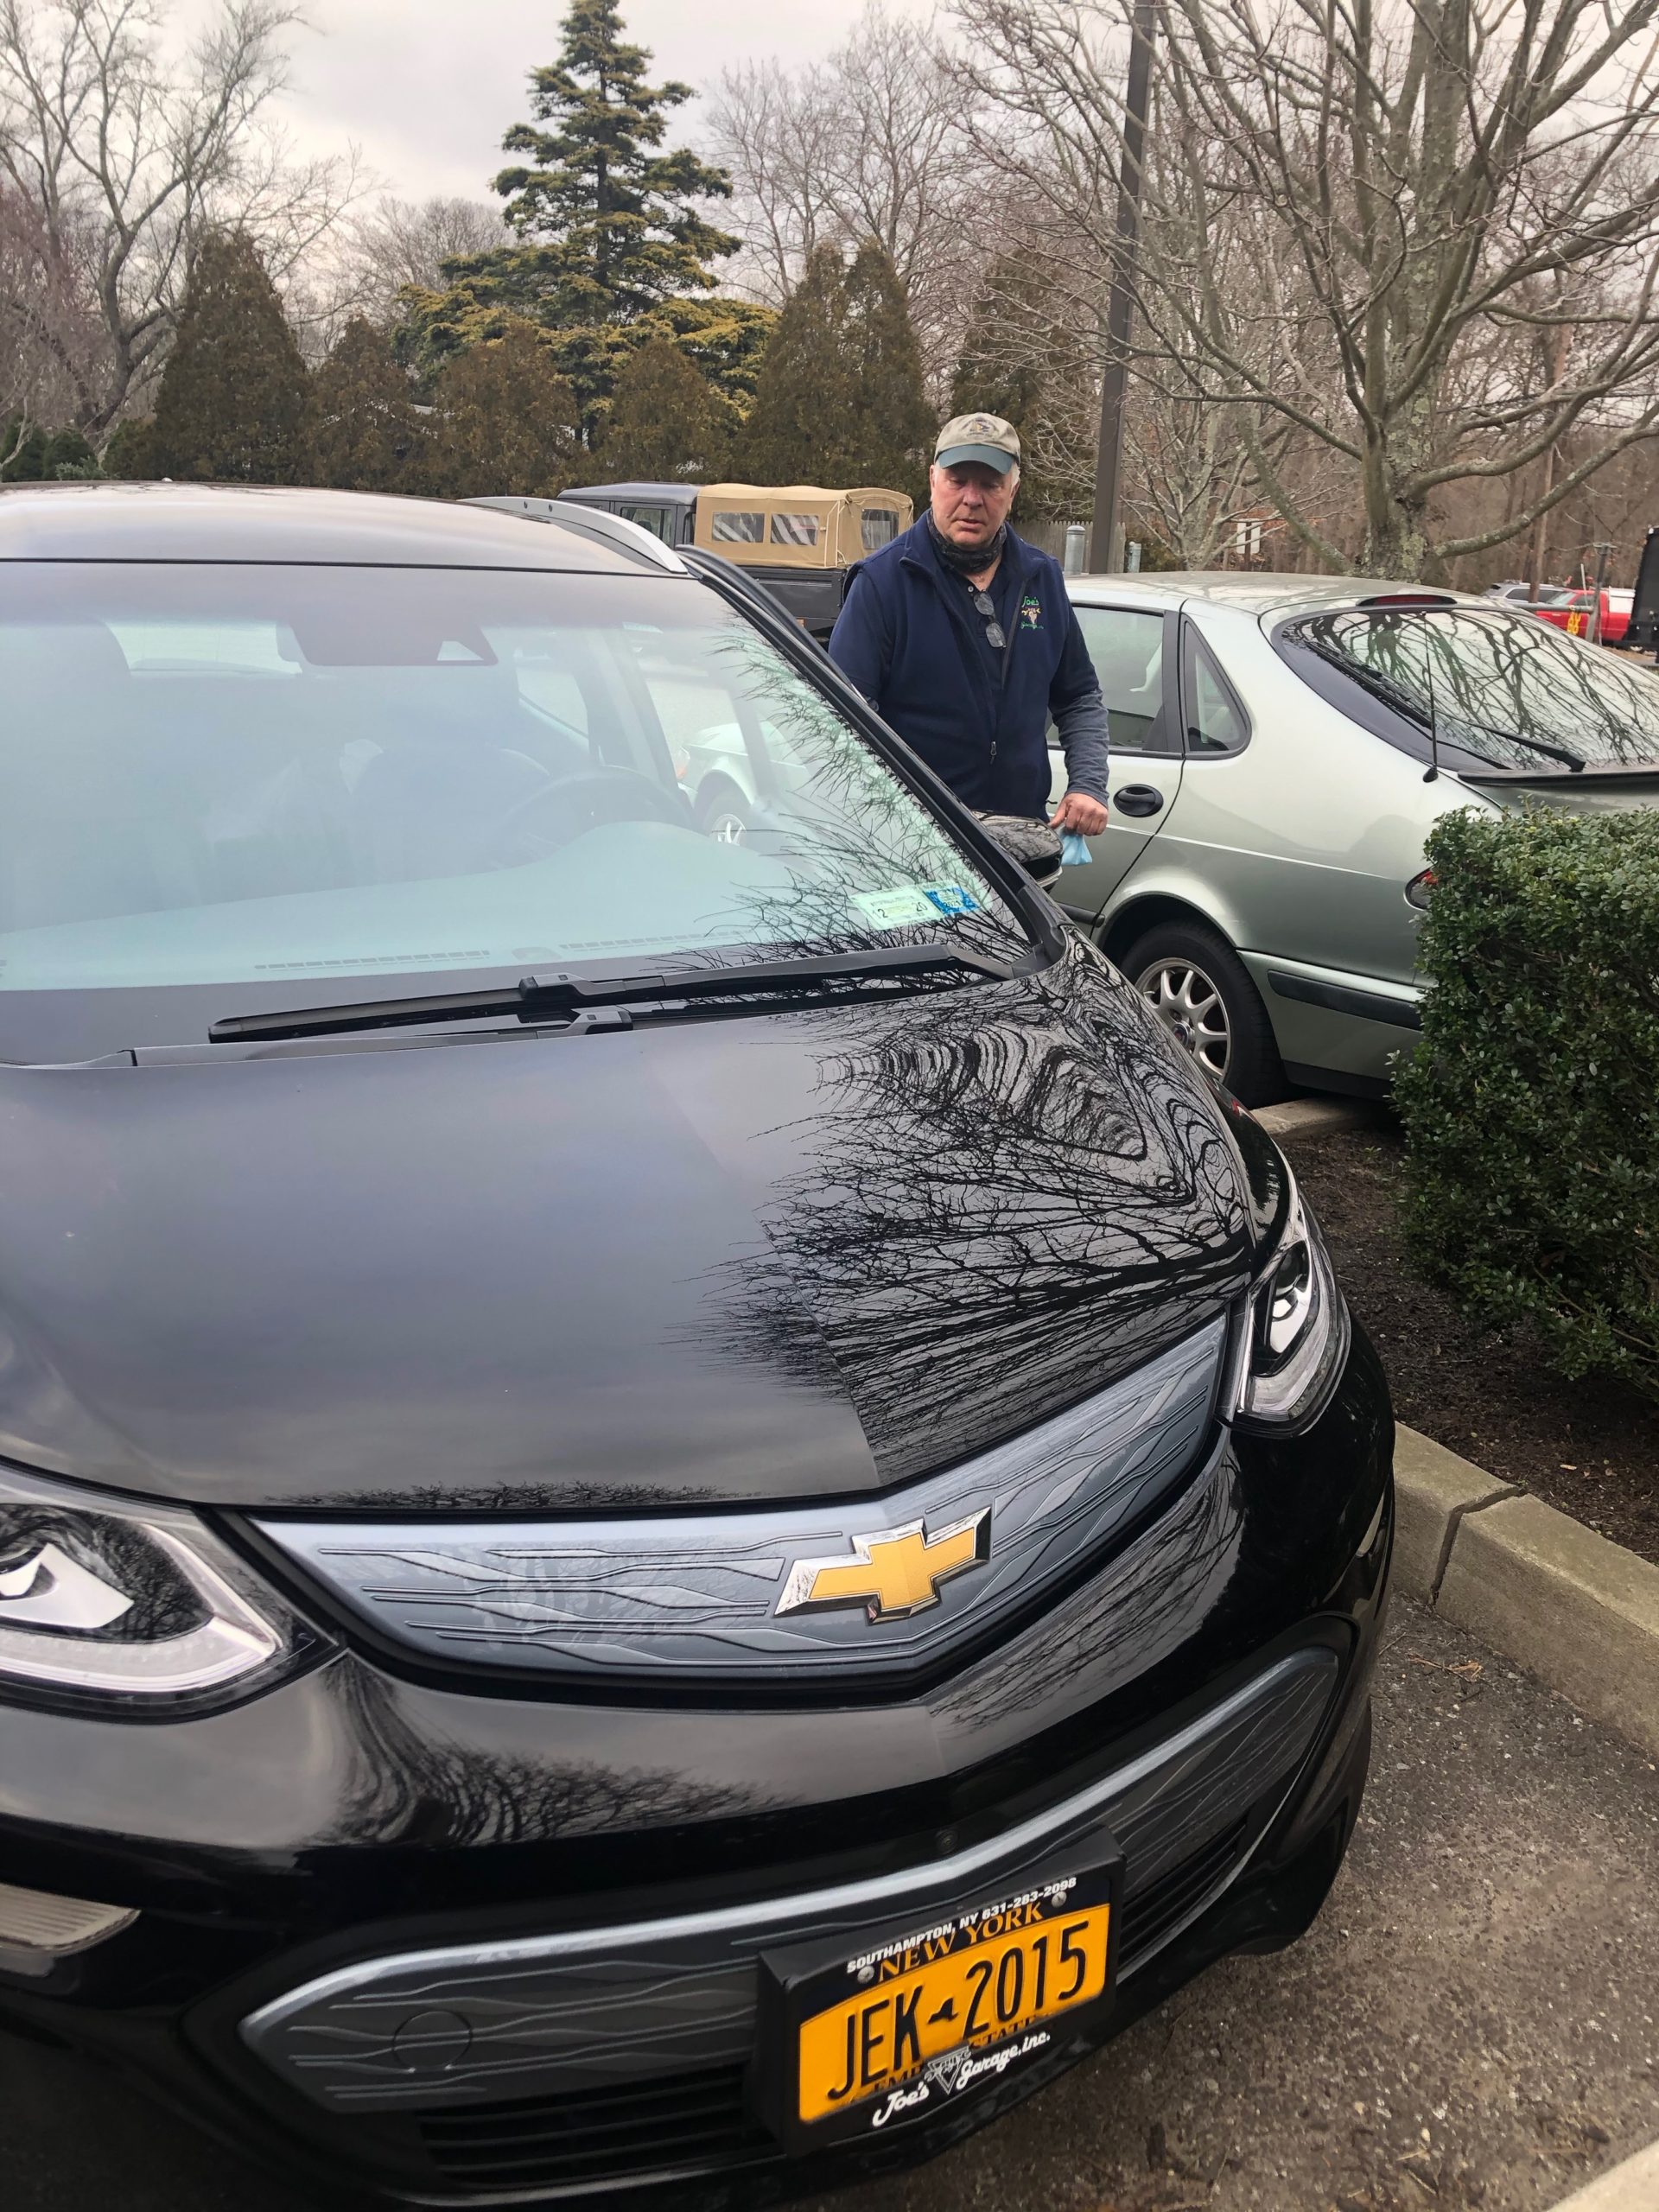 Joe Frizell of Joe’s Garage with his all electric Chevy Bolt.